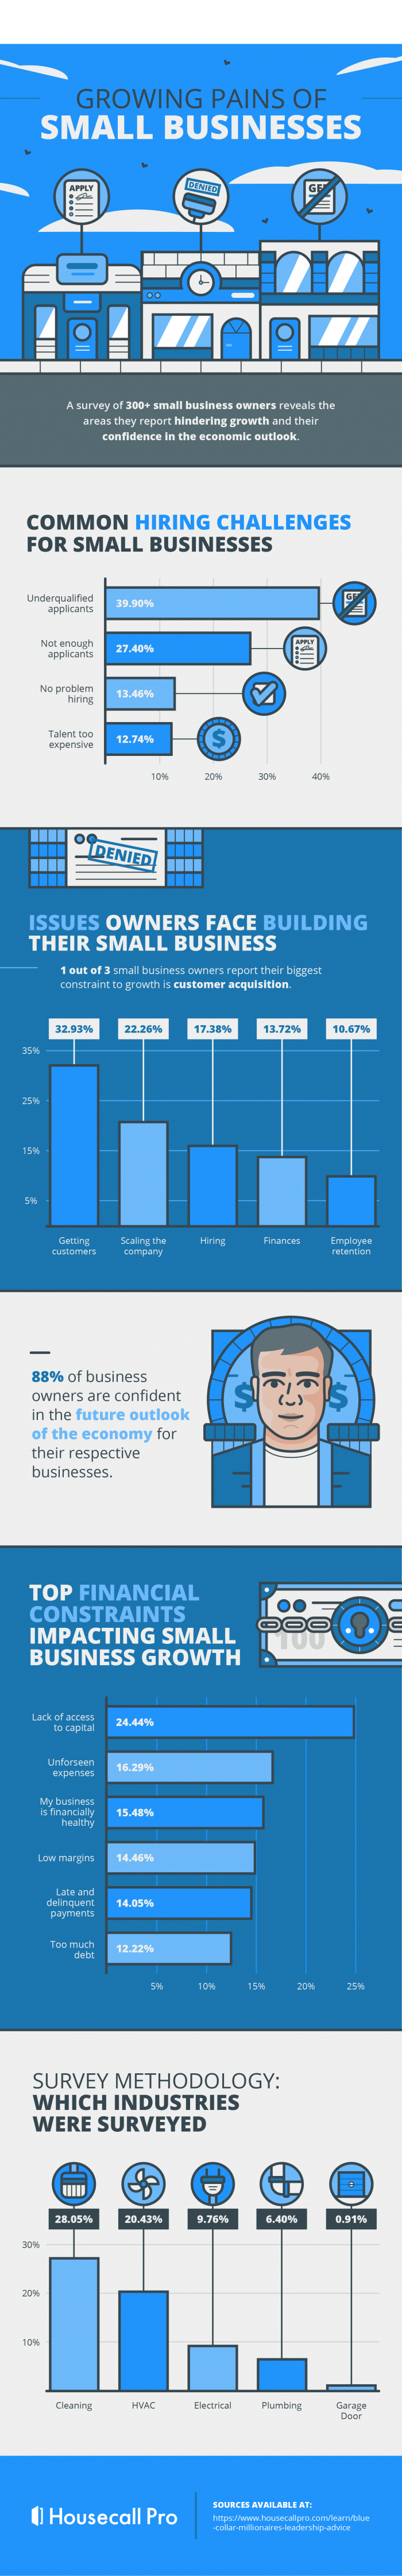 Growing pains of small businesses infographic